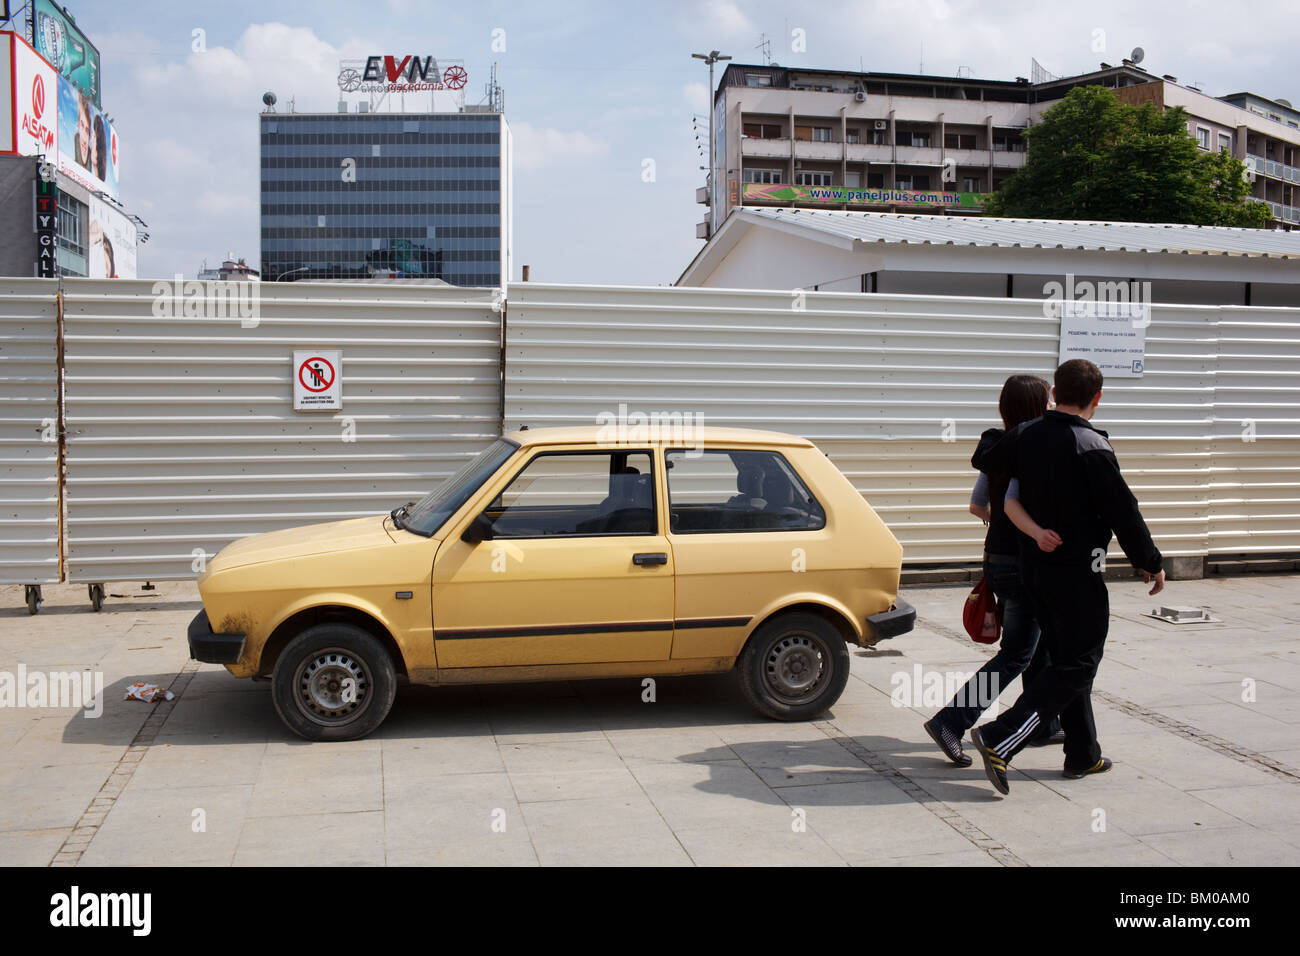 A young couple walks by a yellow Yugo car parked in central Skopje, Macedonia. Stock Photo